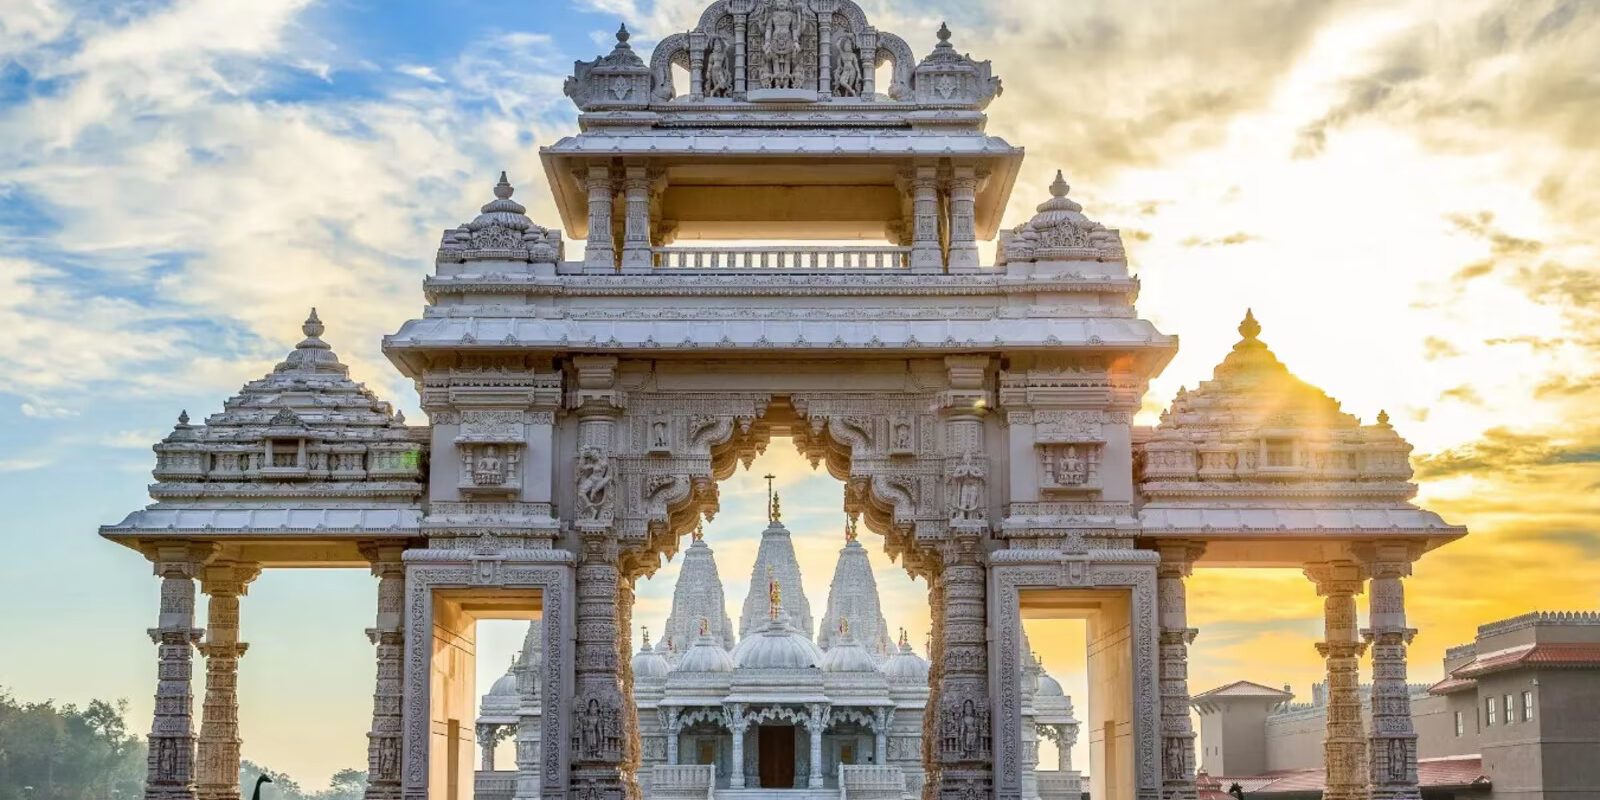 The World's Second Largest Hindu Temple Outside India Opens in New Jersey | Travellingcolor